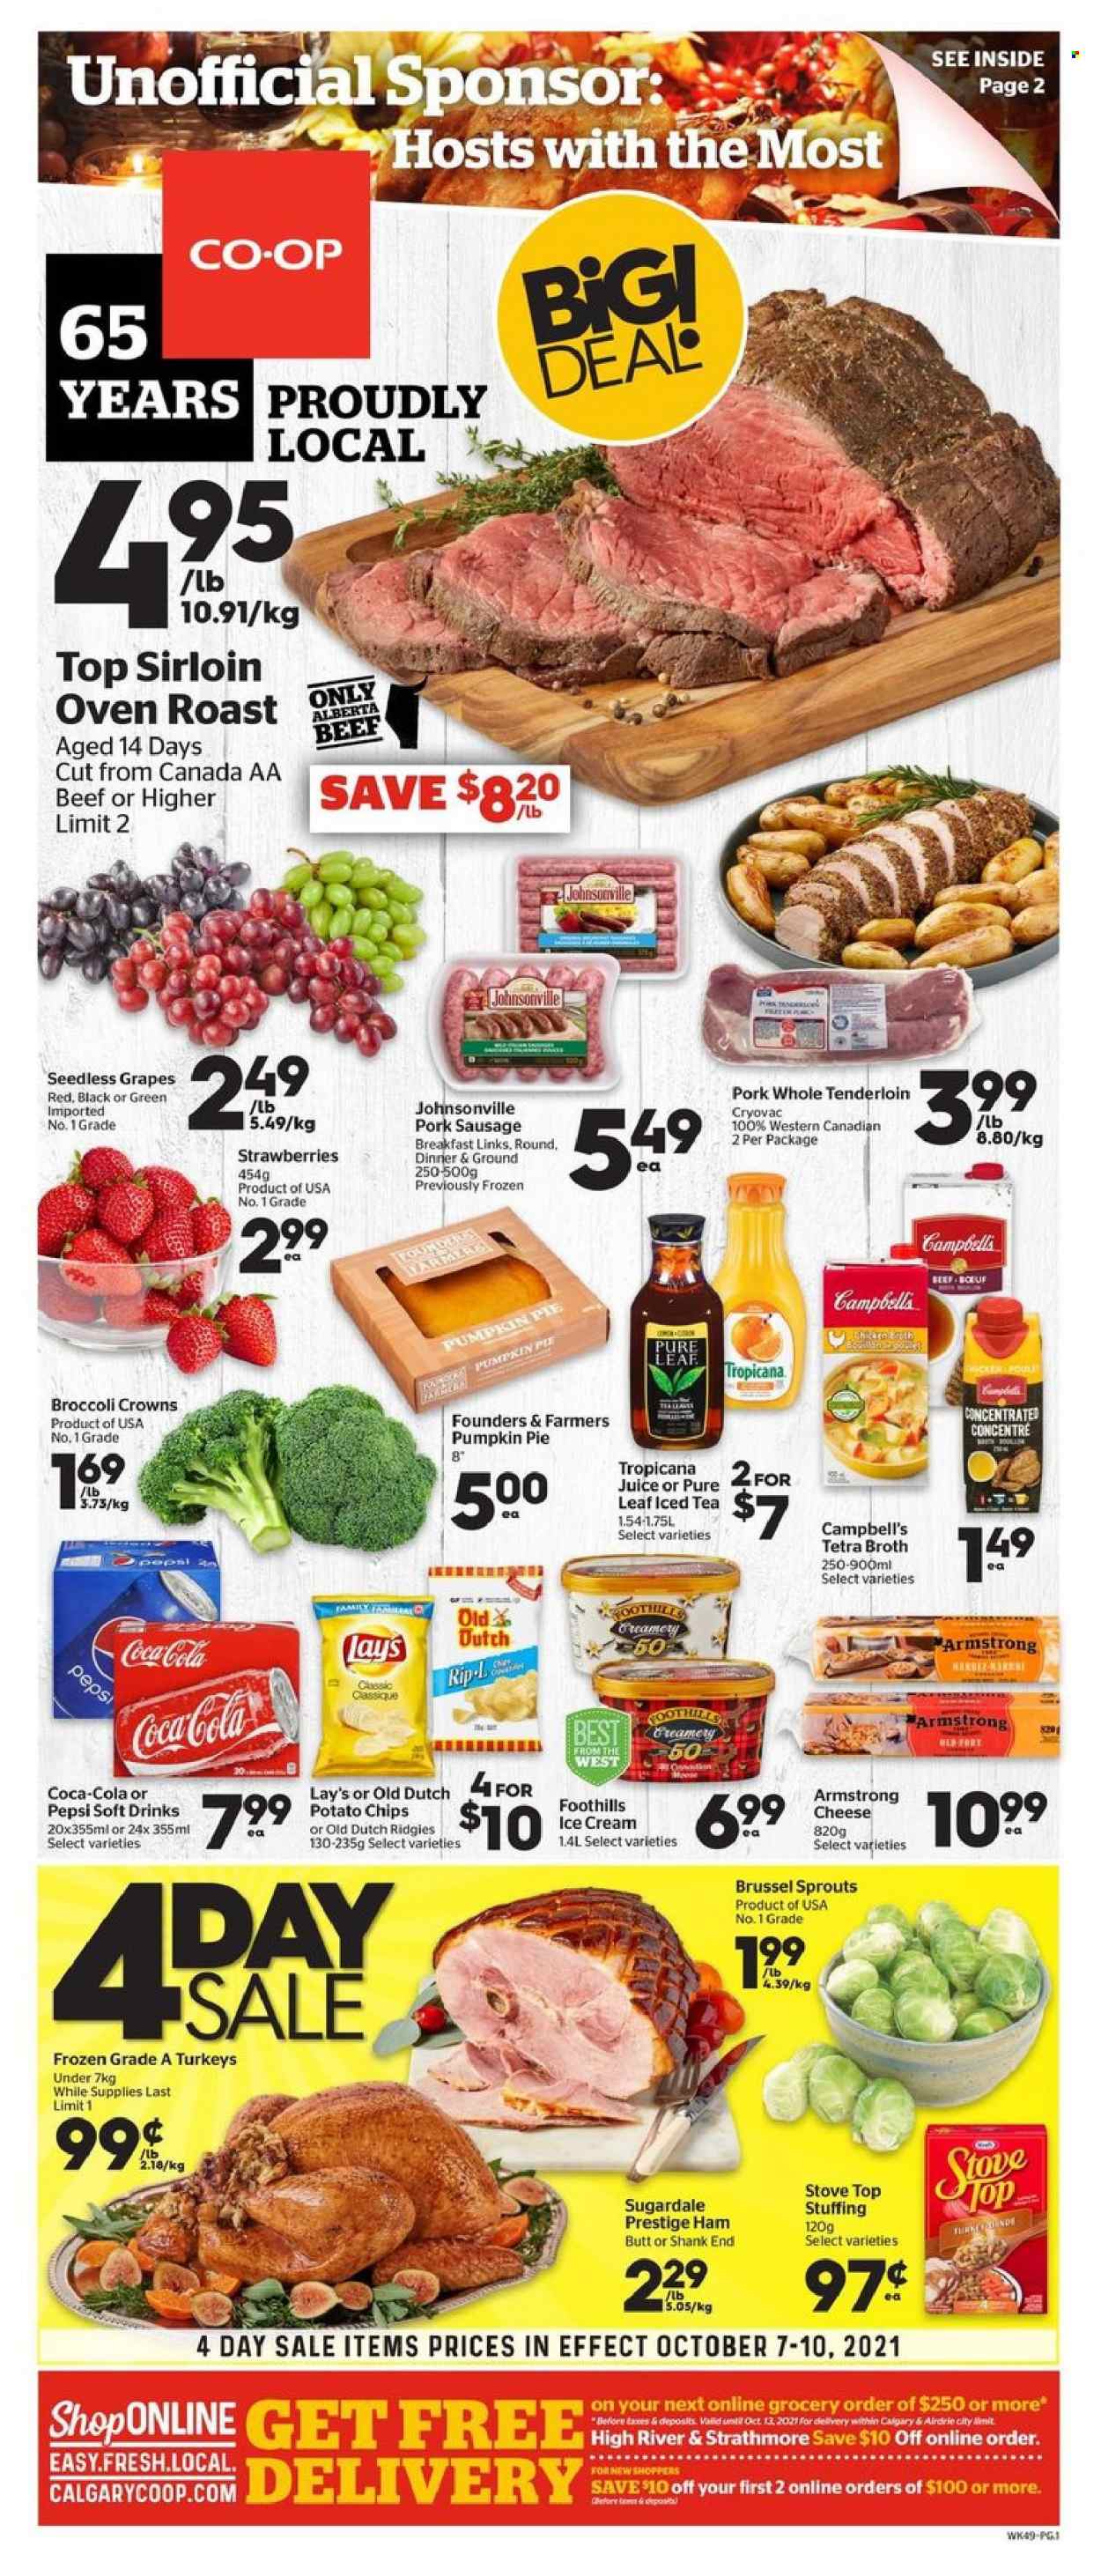 thumbnail - Calgary Co-op Flyer - October 07, 2021 - October 13, 2021 - Sales products - pie, pumpkin, brussel sprouts, grapes, seedless grapes, strawberries, Campbell's, Sugardale, ham, Johnsonville, sausage, pork sausage, cheese, ice cream, potato chips, Lay’s, broth, Coca-Cola, Pepsi, juice, ice tea, soft drink, Pure Leaf. Page 1.